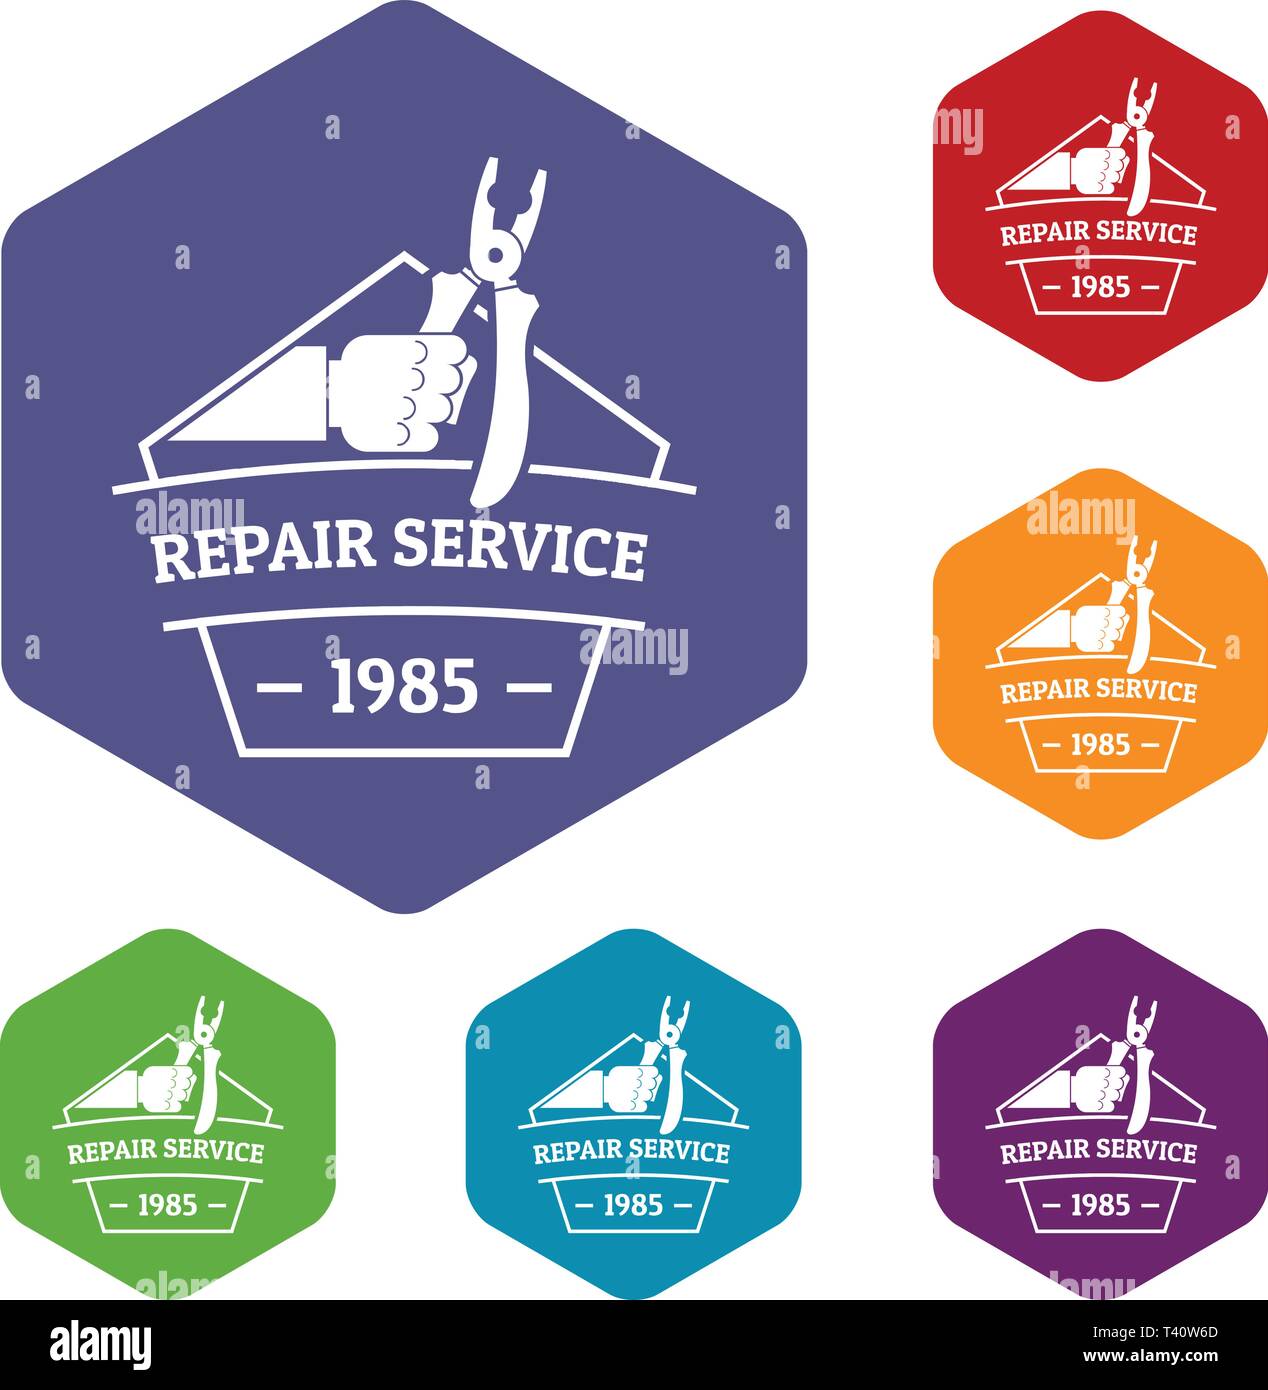 Repair service icons vector hexahedron Stock Vector